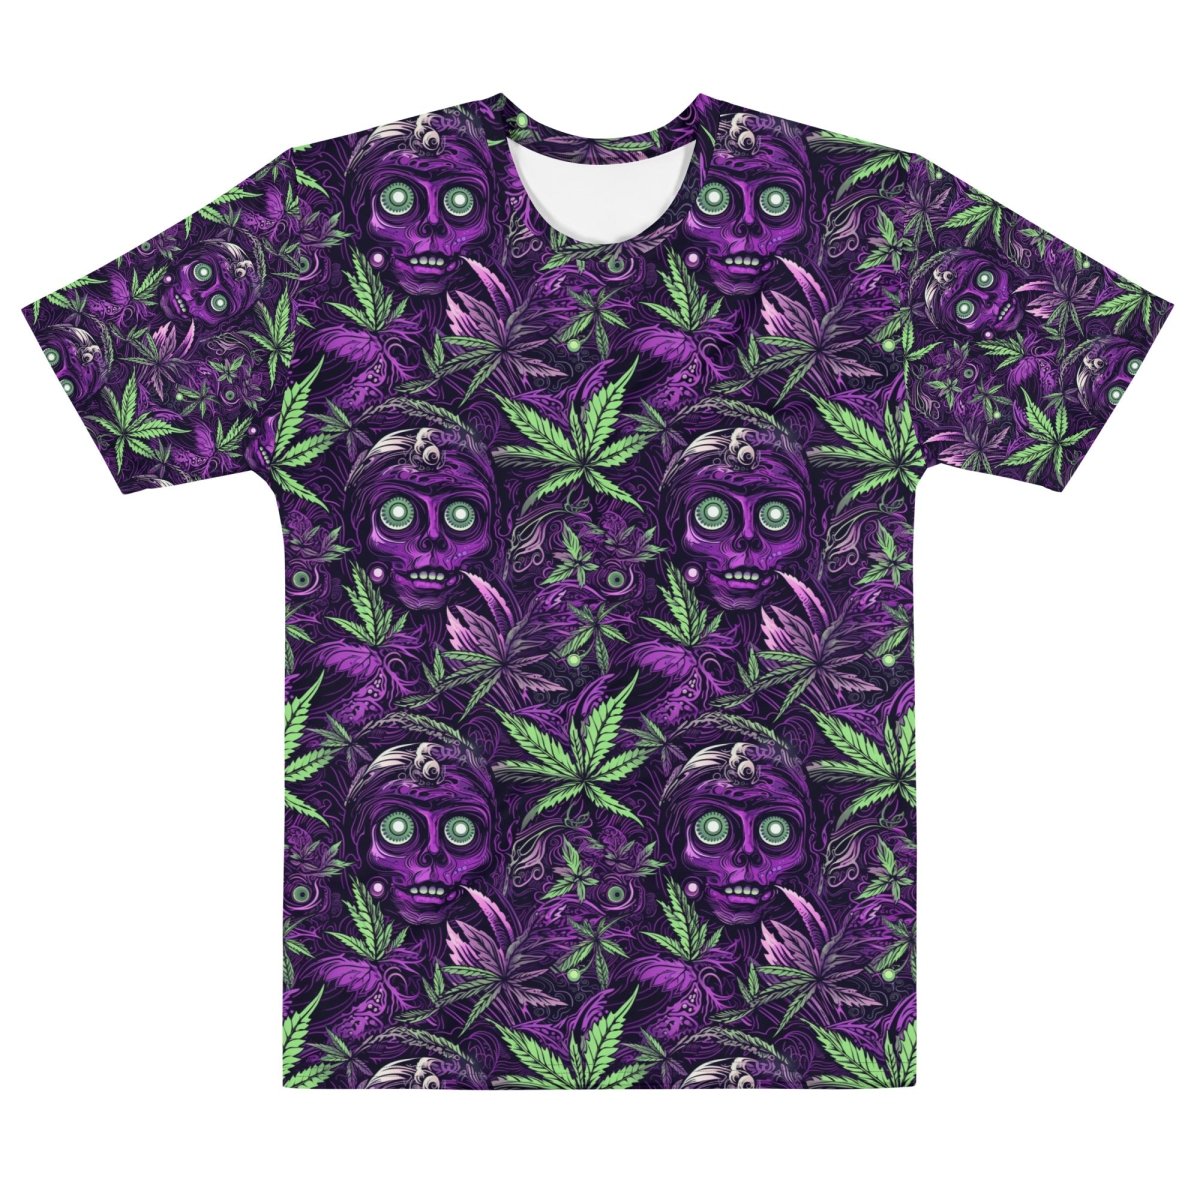 Leaves & Creature T-Shirt - Mainly High